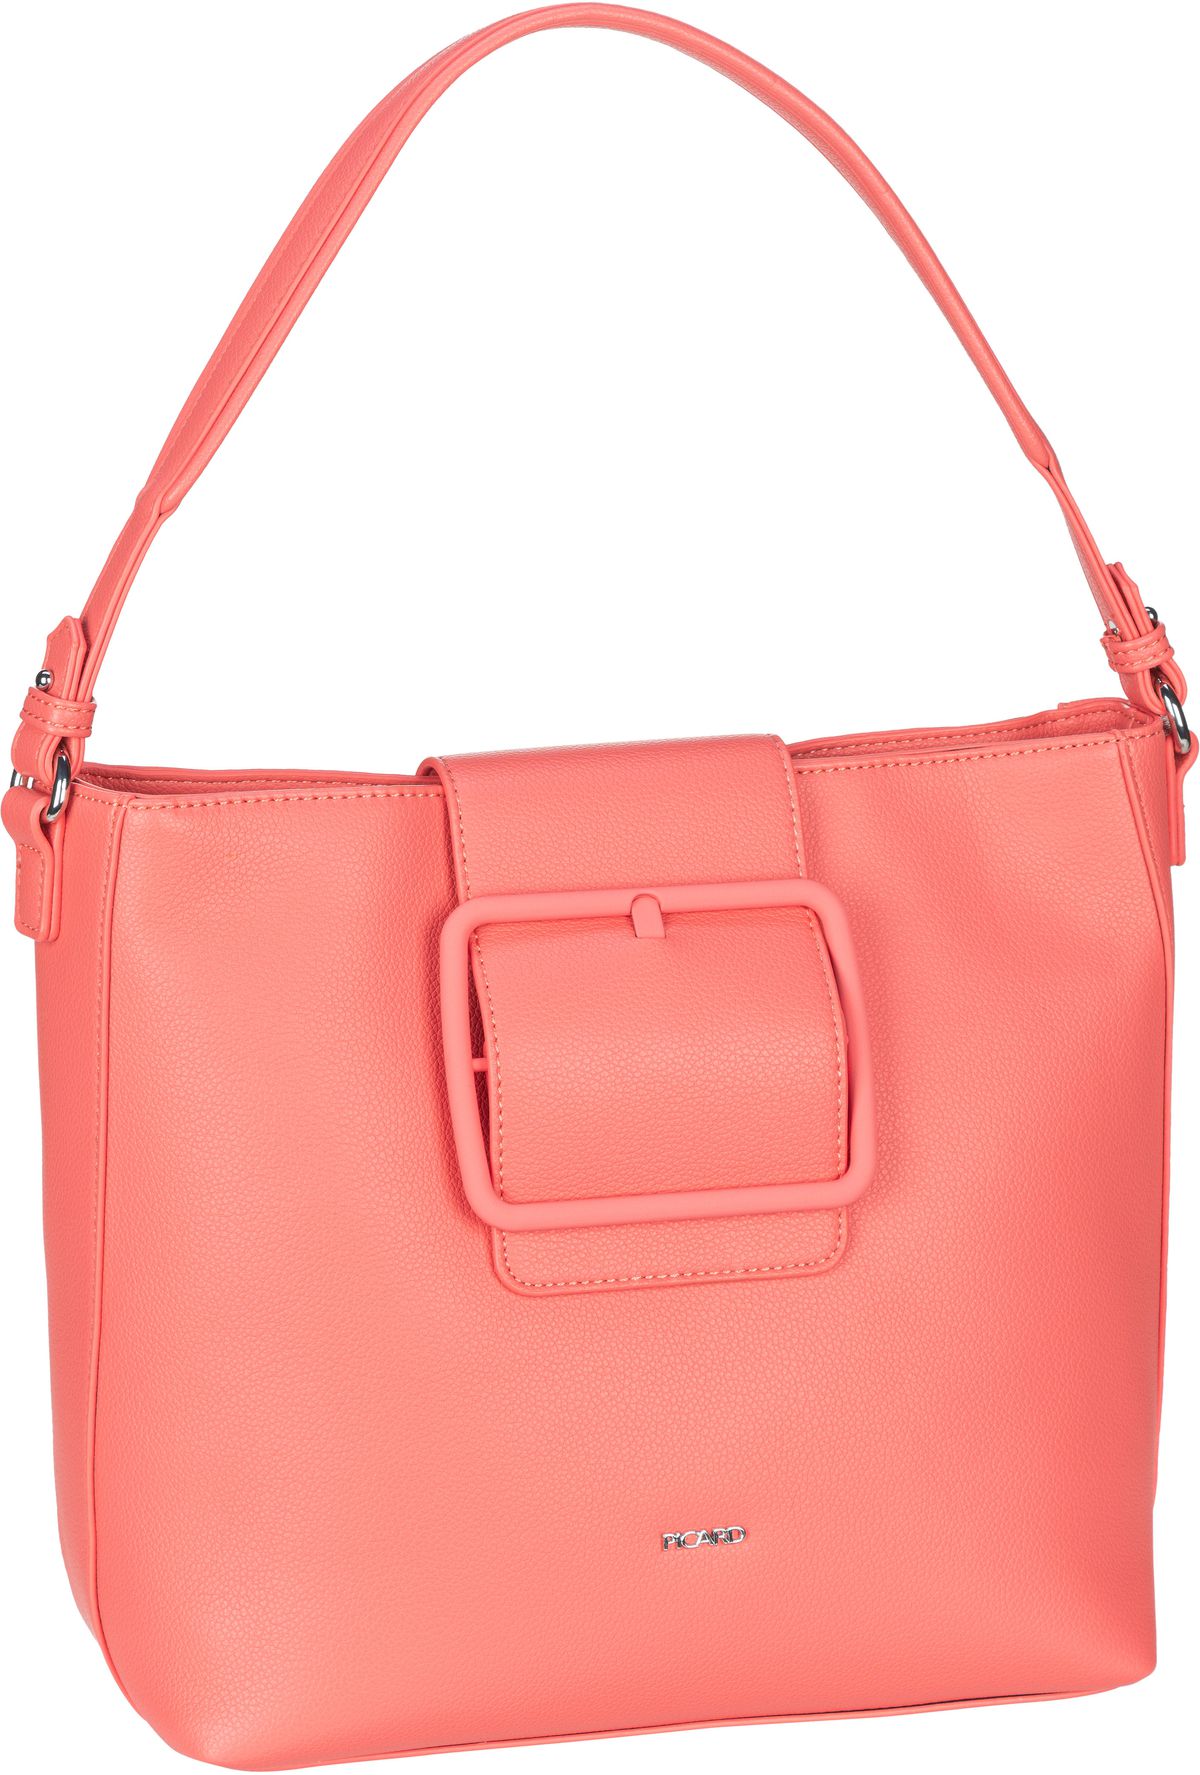 Picard Be Loved 3176  in Pink (14.7 Liter), Beuteltasche